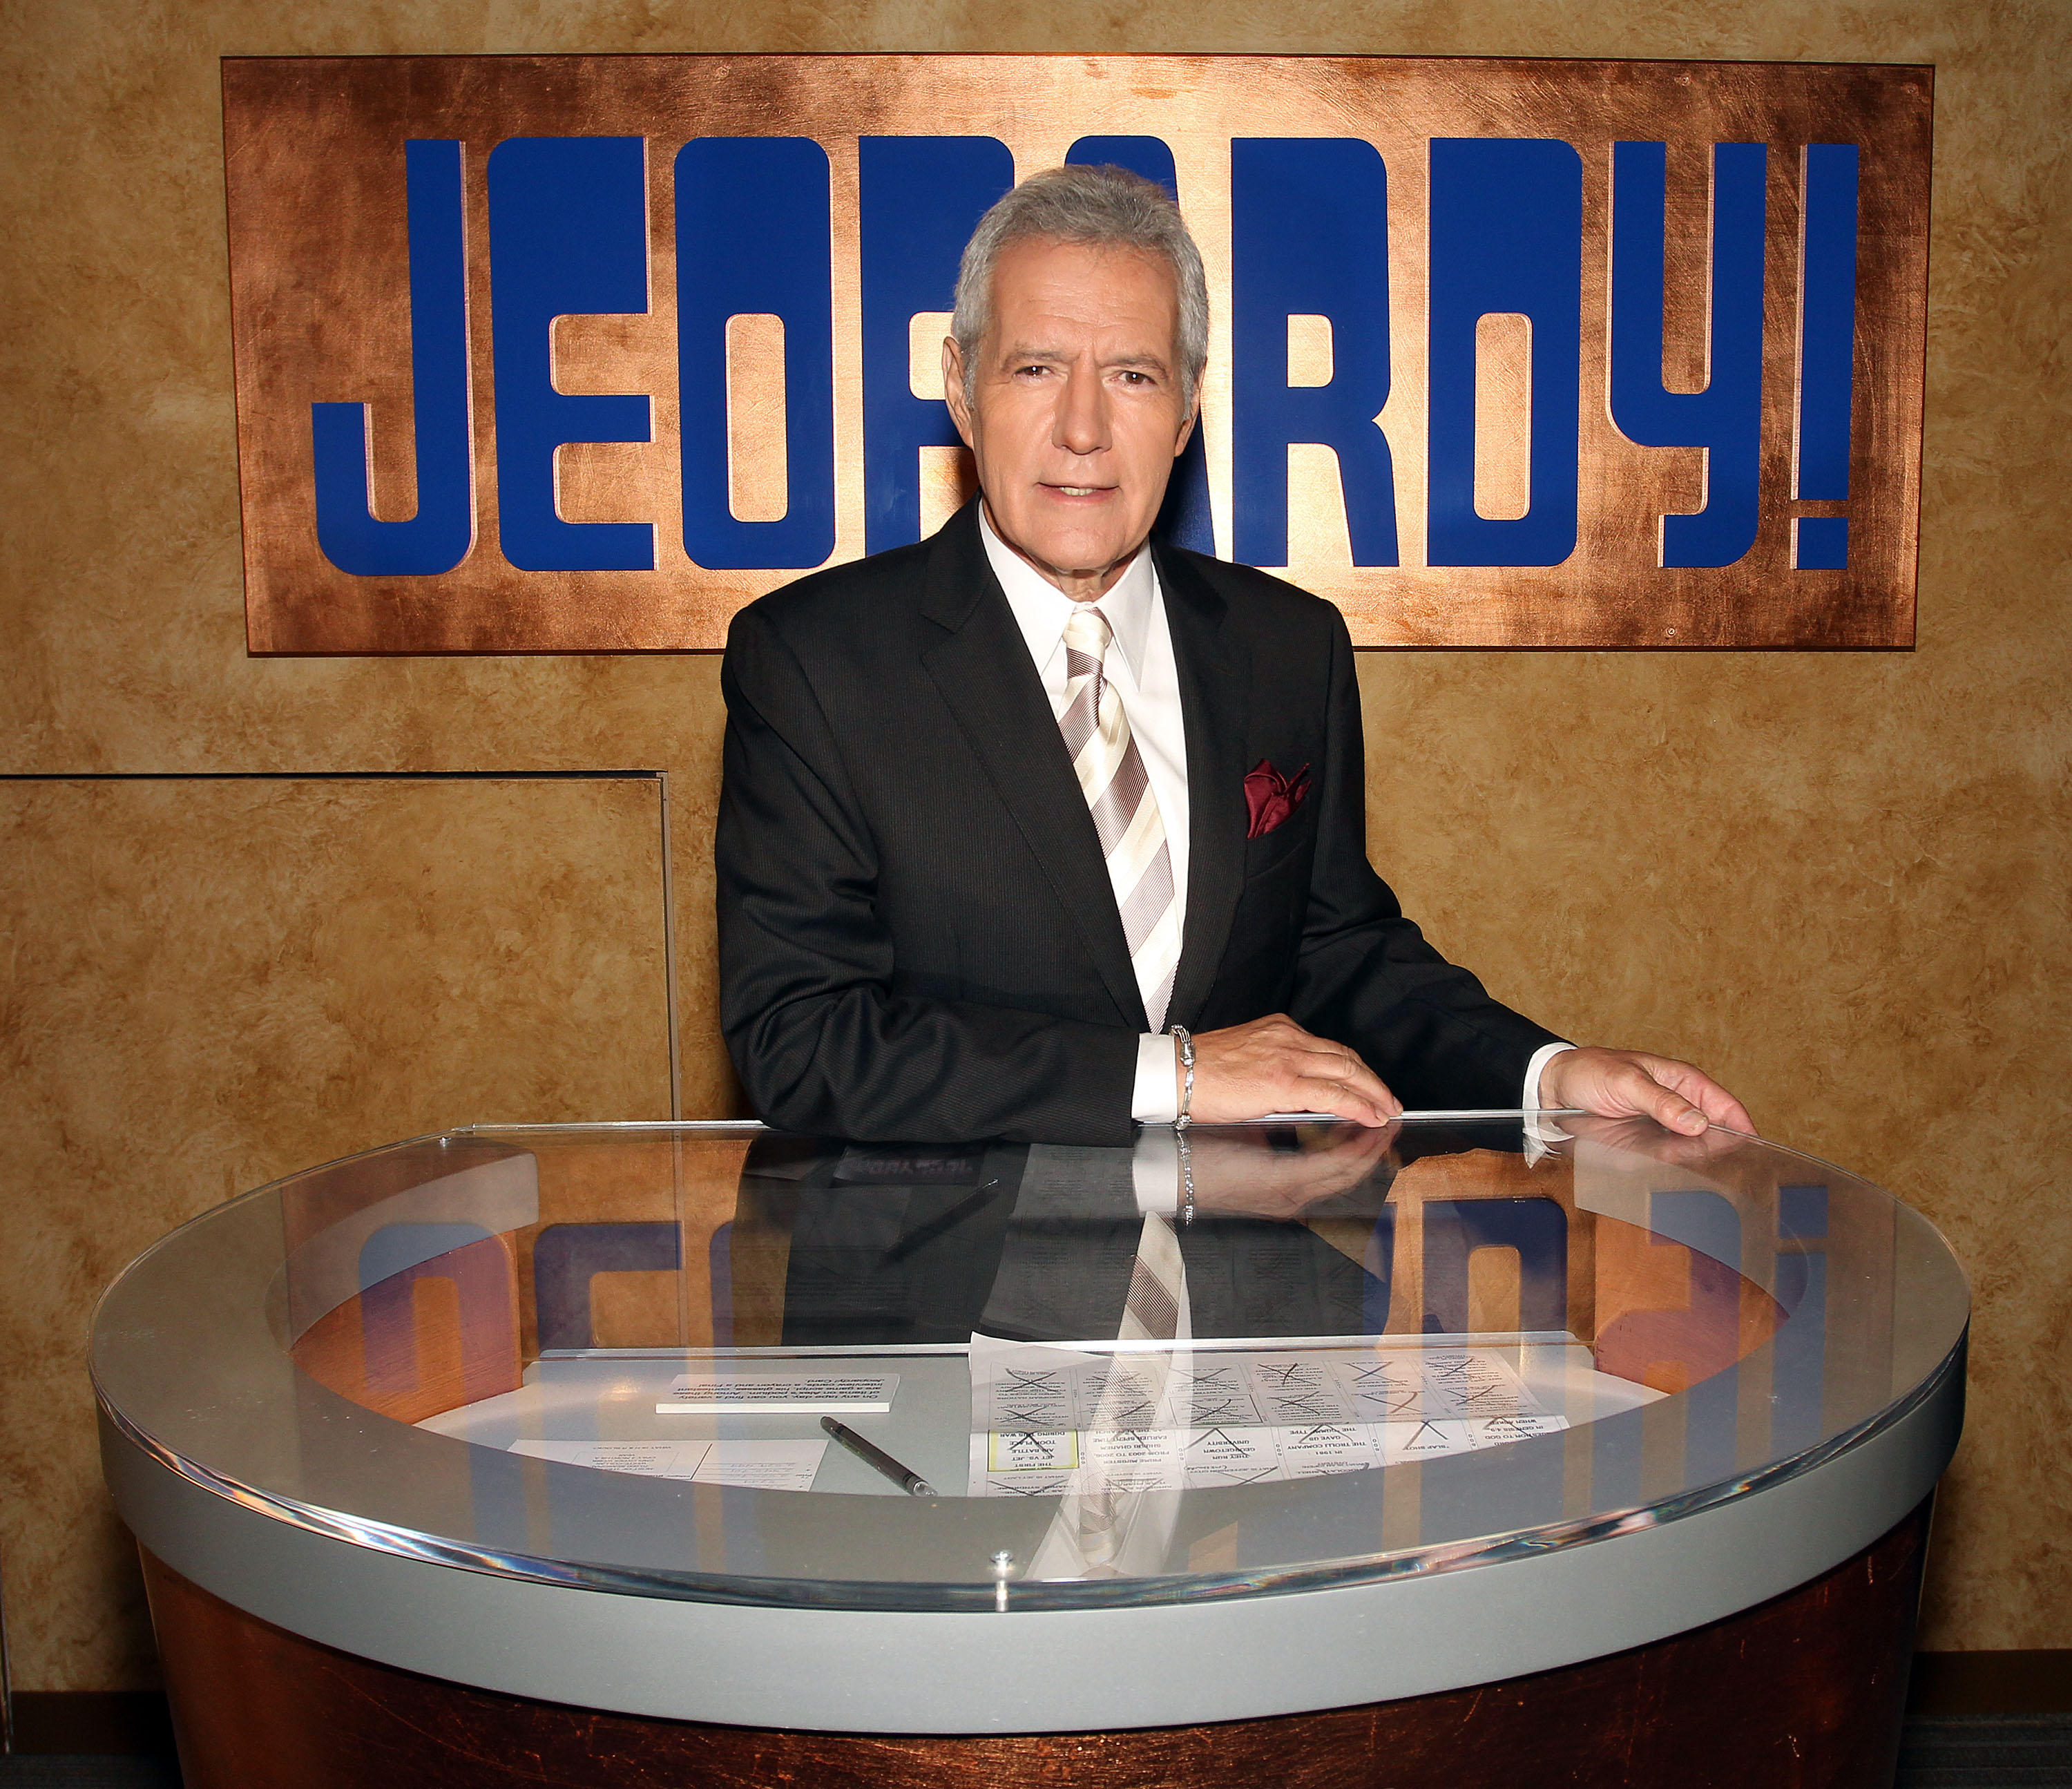 Alex Trebek poses on the set at Sony Pictures for the 28th Season Premiere 'Jeopardy!' on September 20, 2011